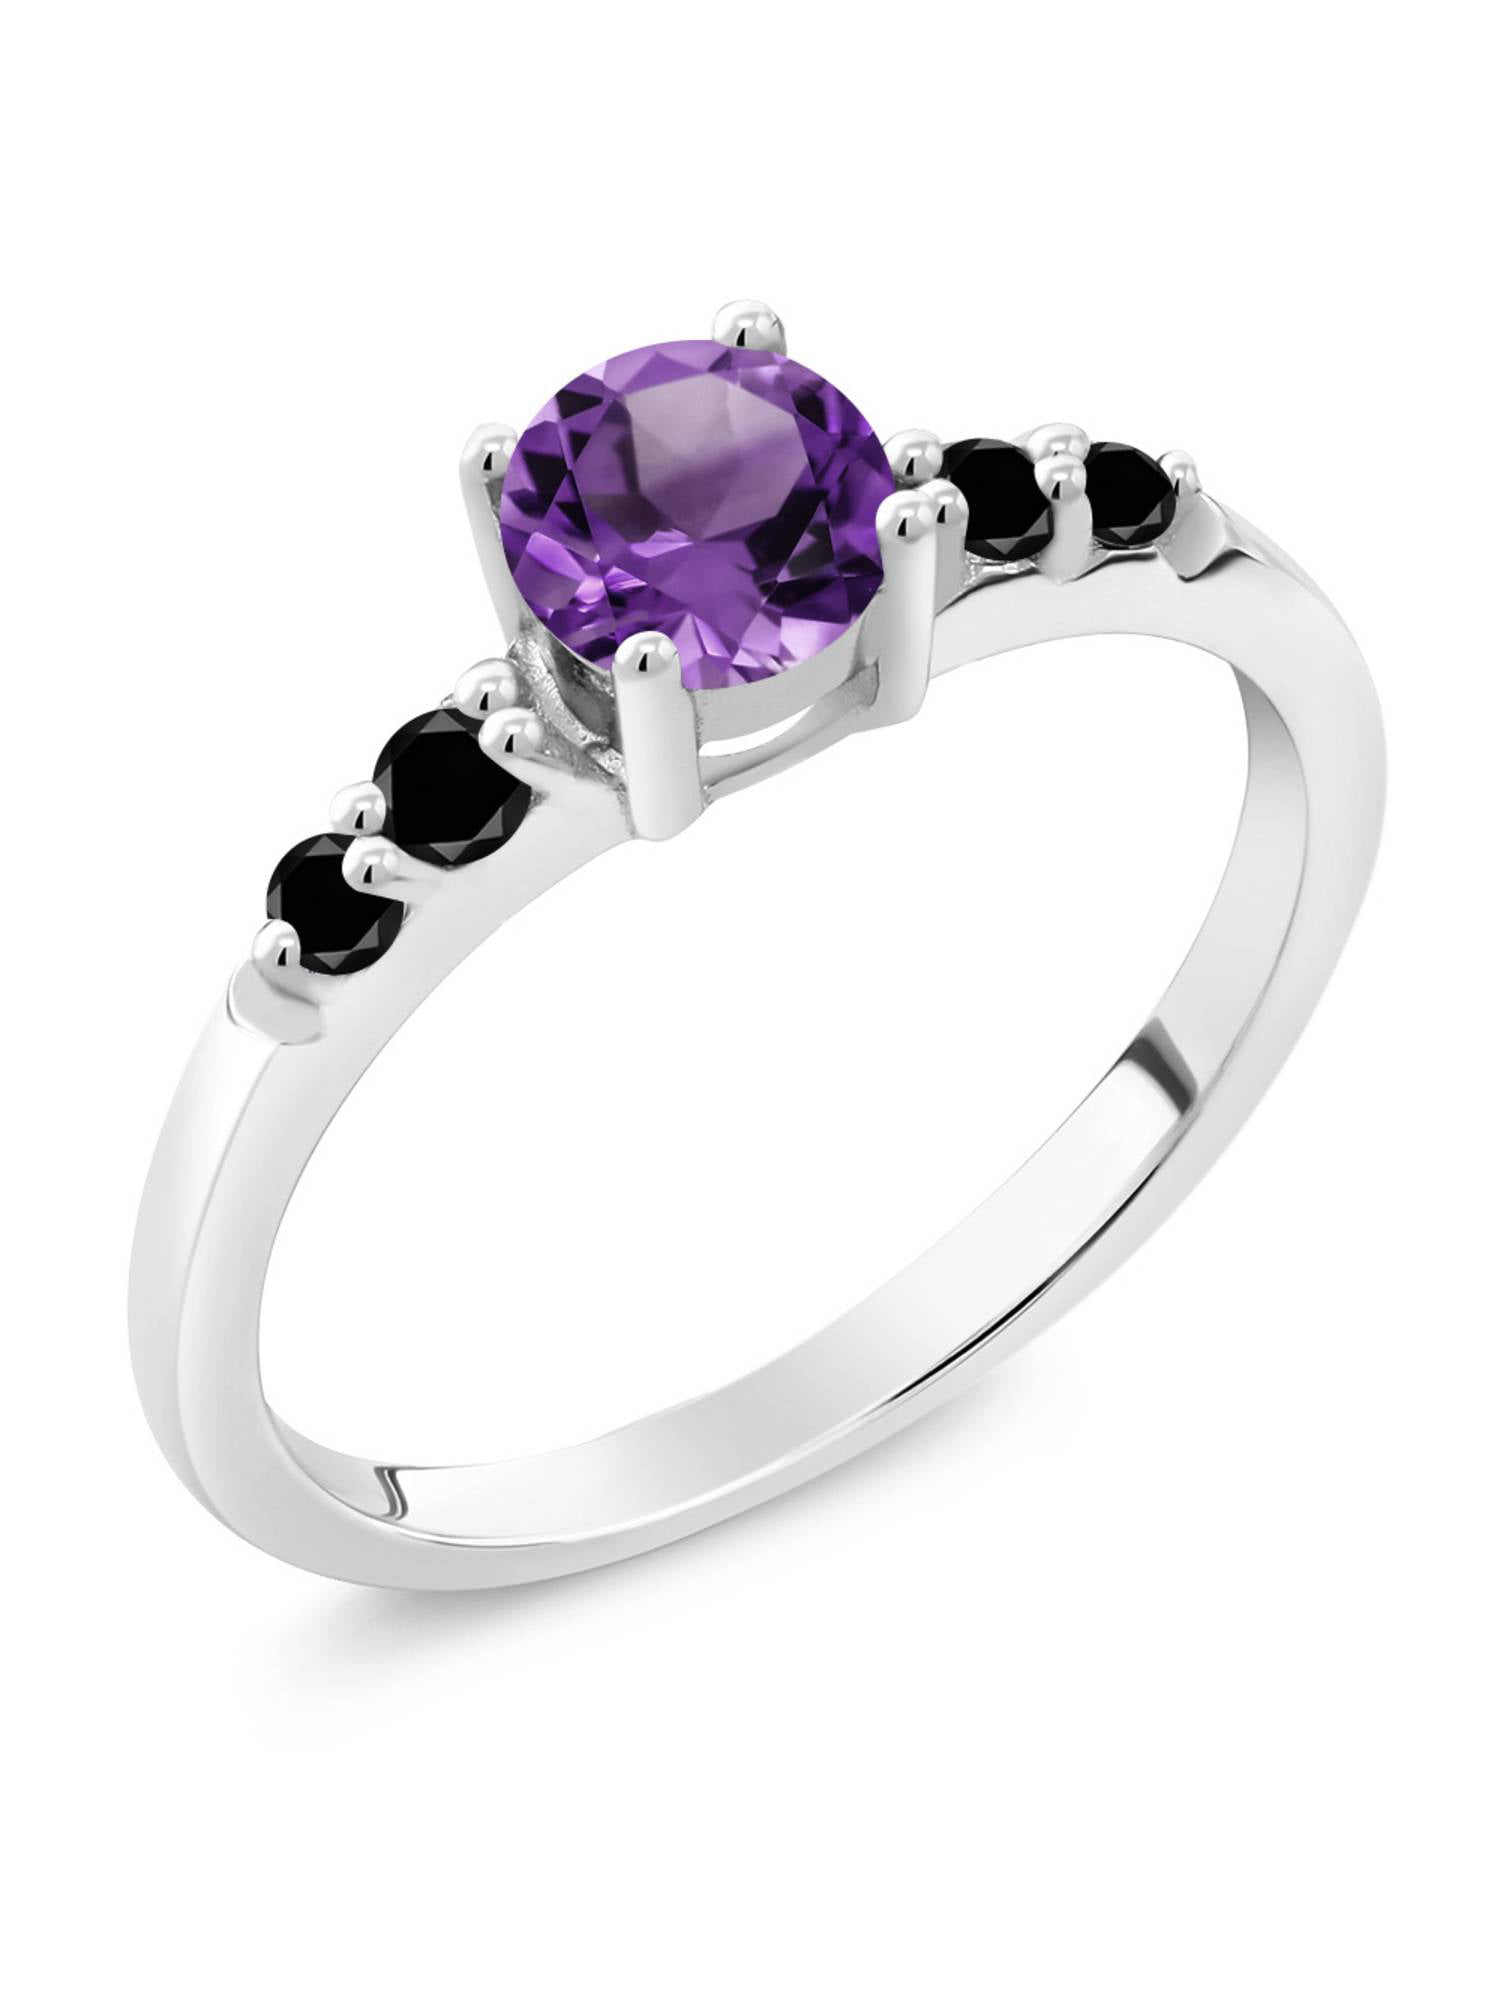 Women's Round Cut Amethyst CZ Black Stainless Steel Heart Fashion Ring Size 6-9 